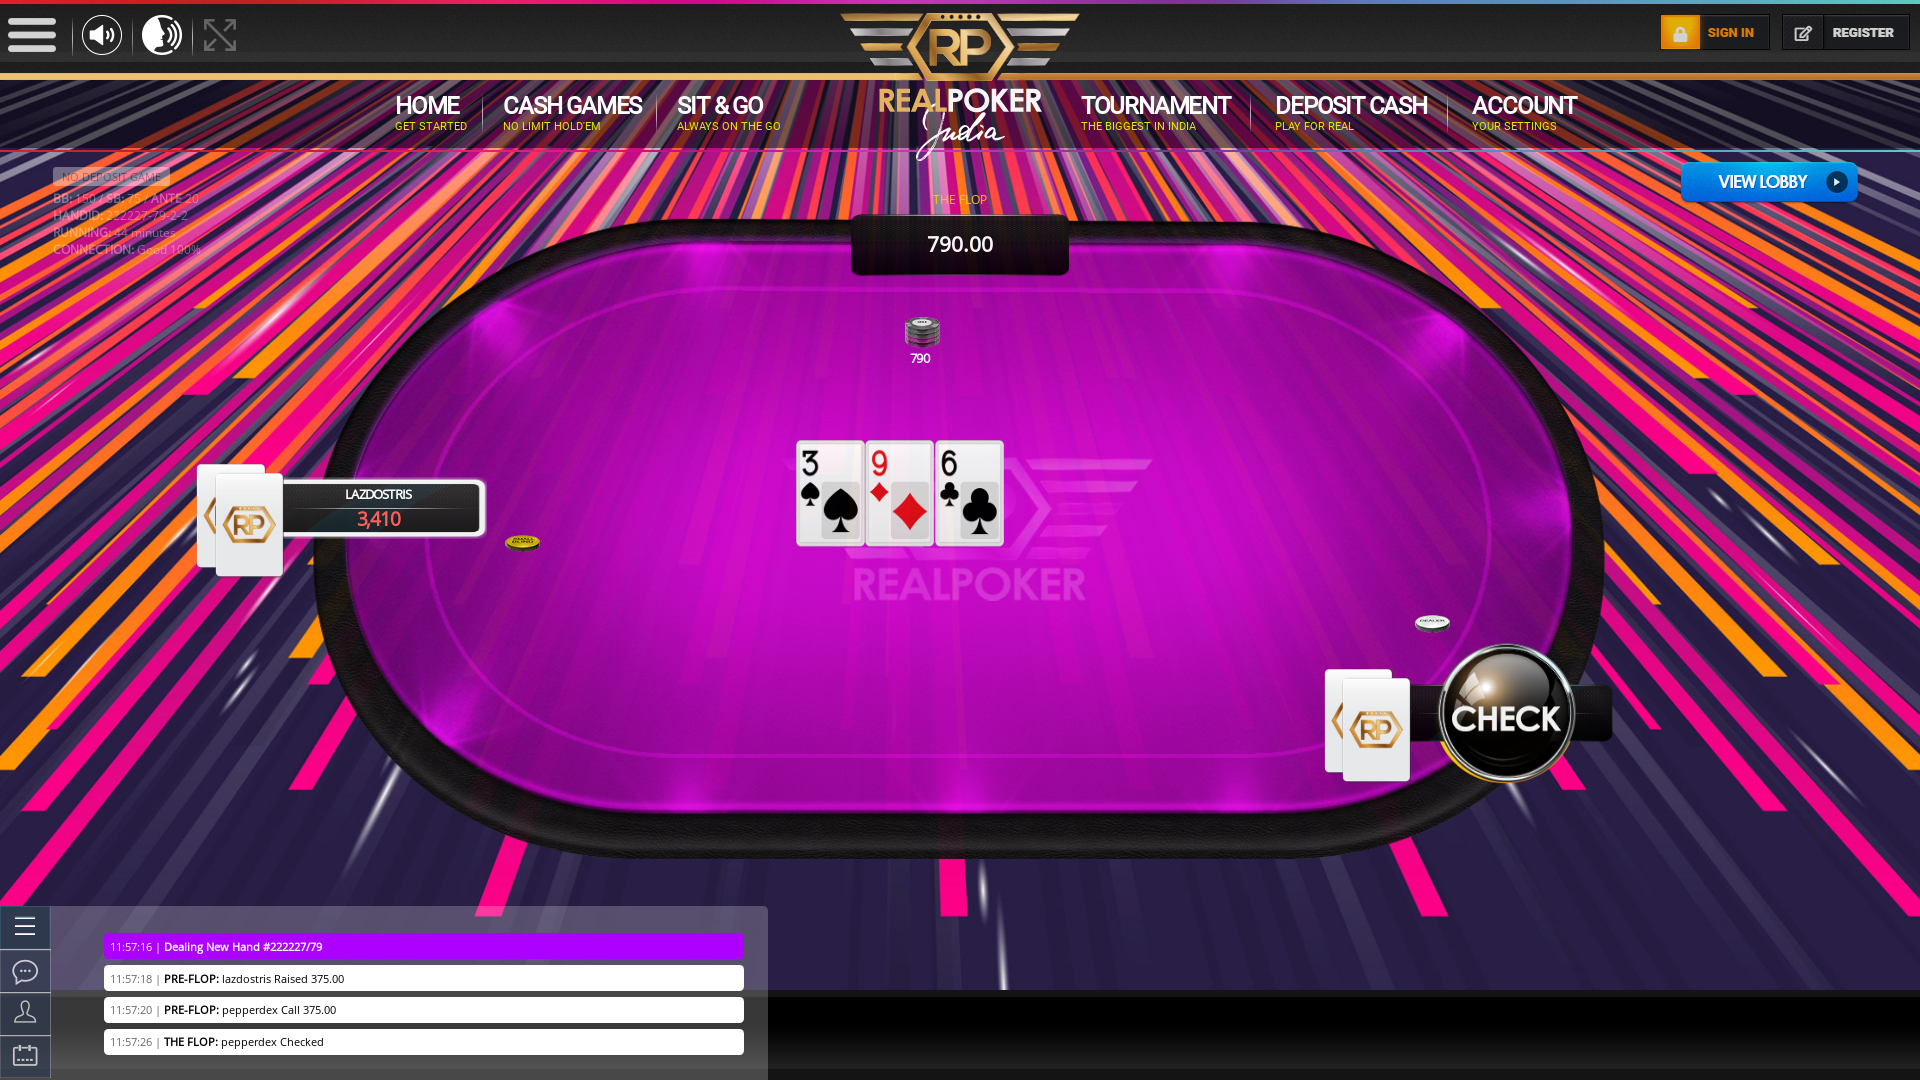 Varthur, Bangalore poker table on a 10 player table in the 44th minute of the meeting